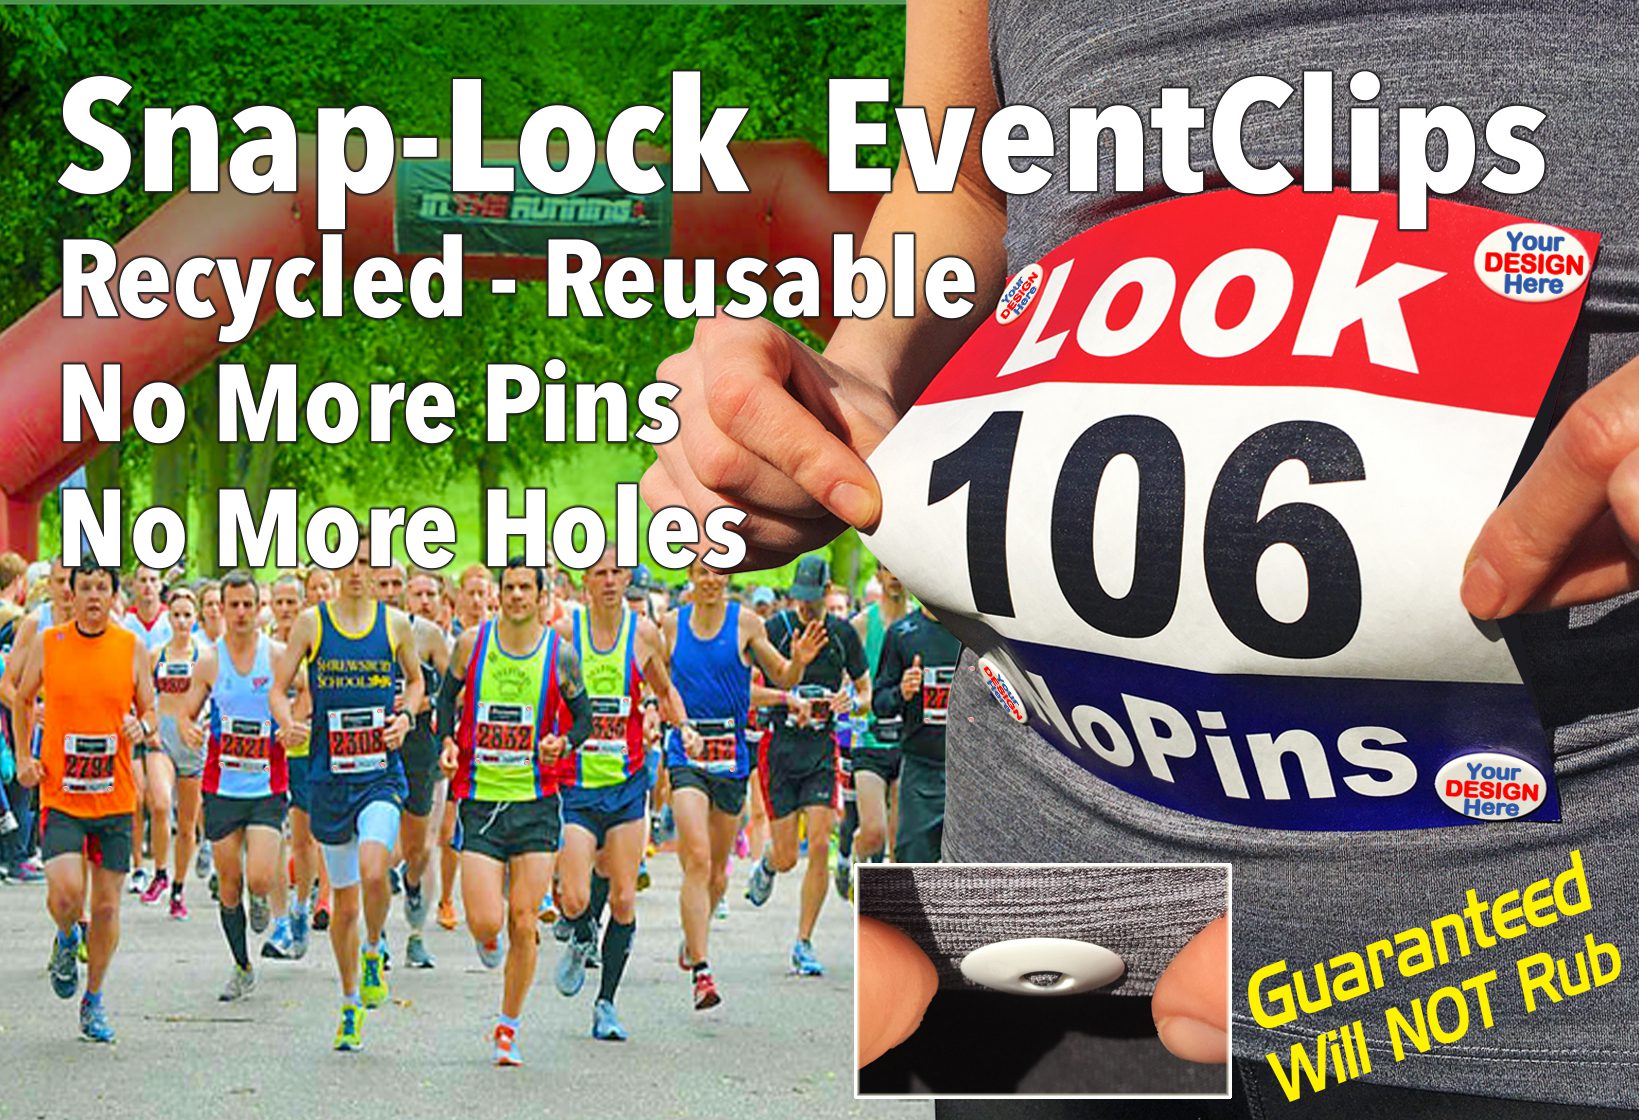 Personalized Running Bib Clips - Race Bib Holder, Keychain & Enamel Pins  Promotional Products Manufacturer